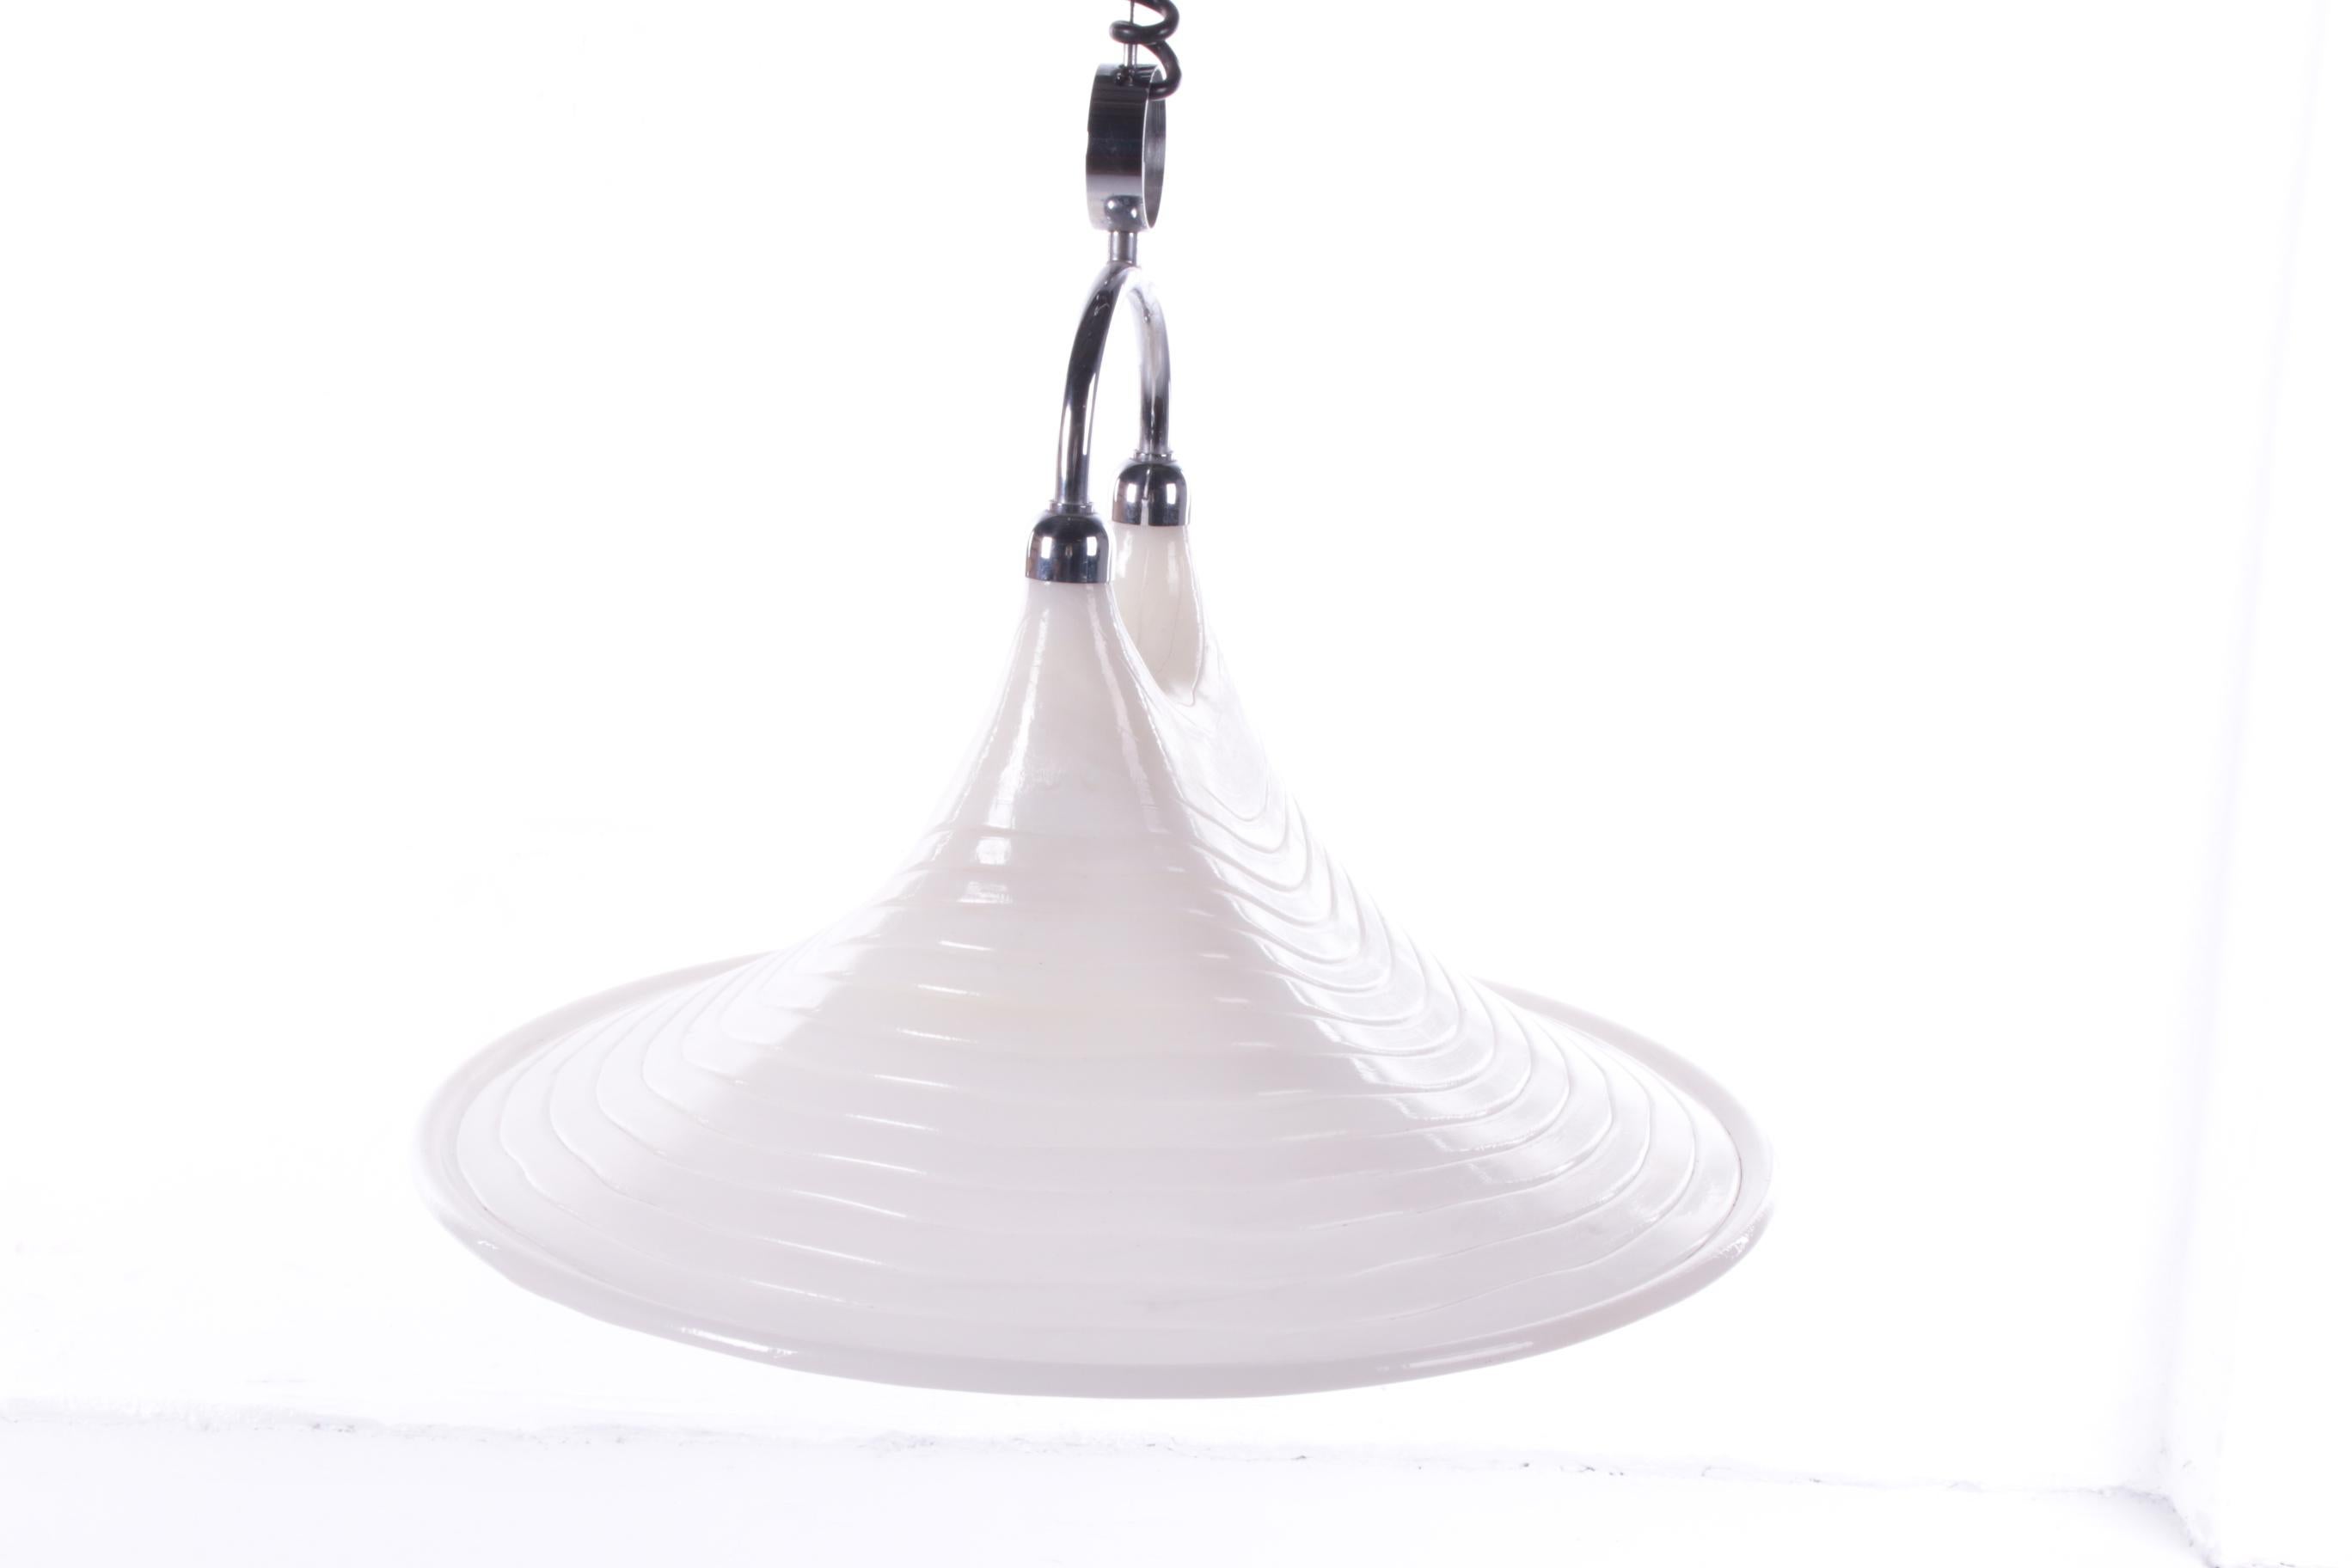 This is a beautiful white Spice Age plastic with Chrome hanging lamp.
Is Made By Cristallux Germany 1970
There is a spring in it to hang the lamp down or up.
There are kind of lines in the hood, which gives a nice effect when the lamp is on.
It